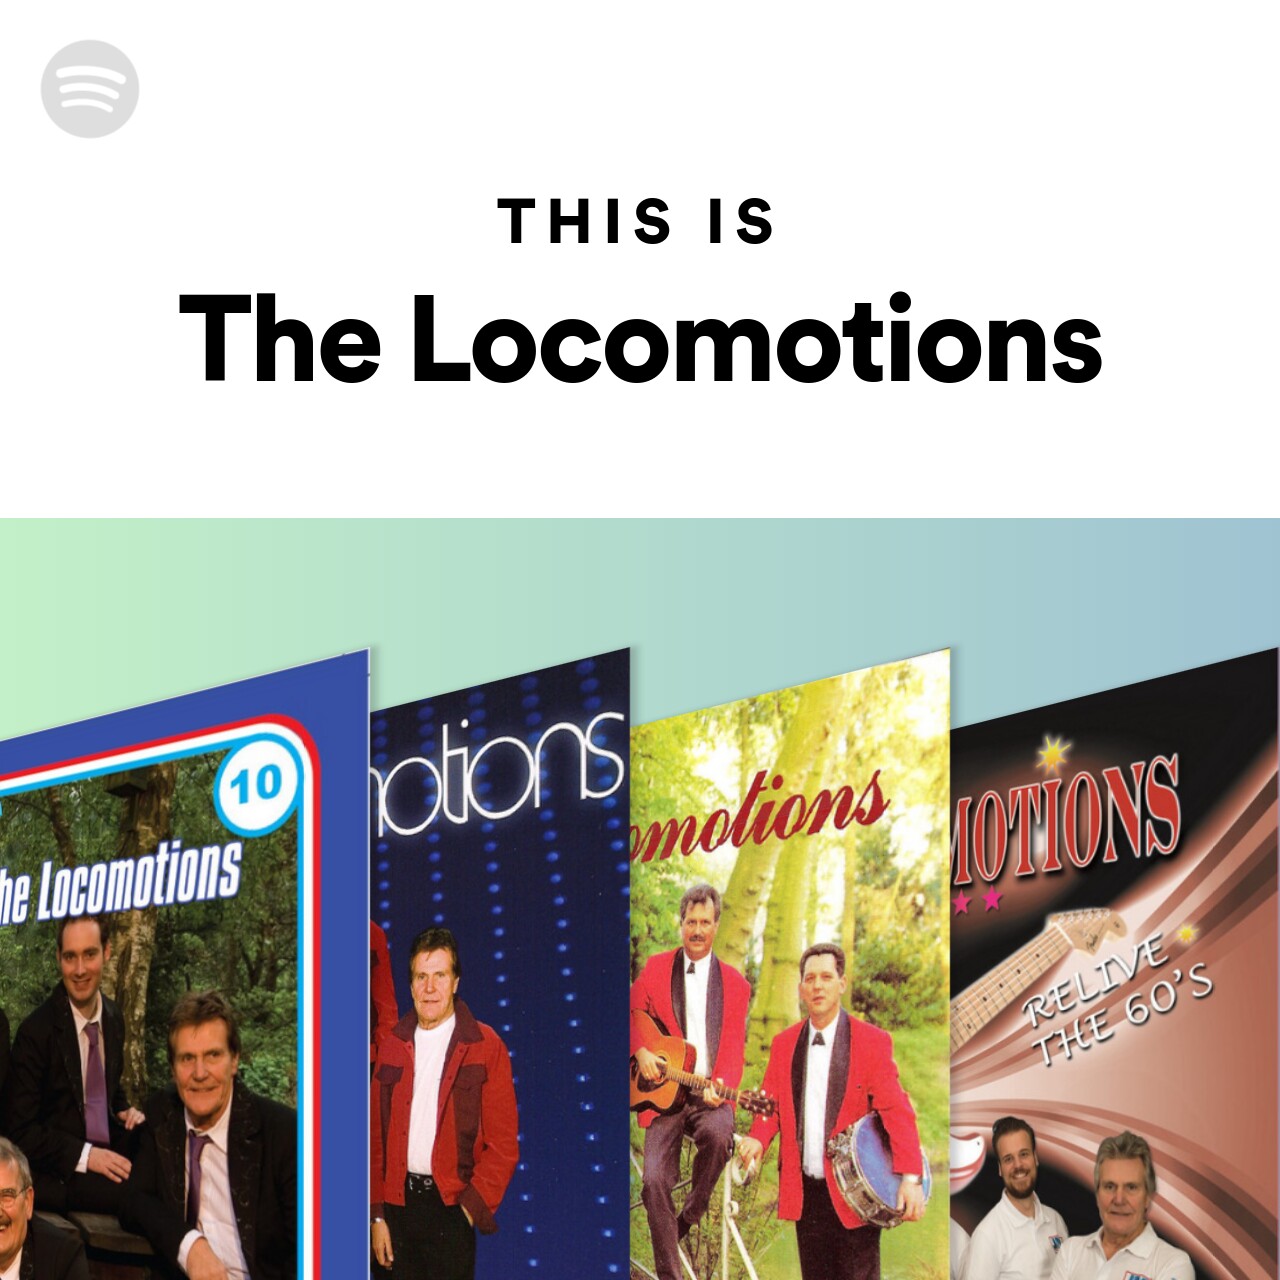 This is The Locomotions